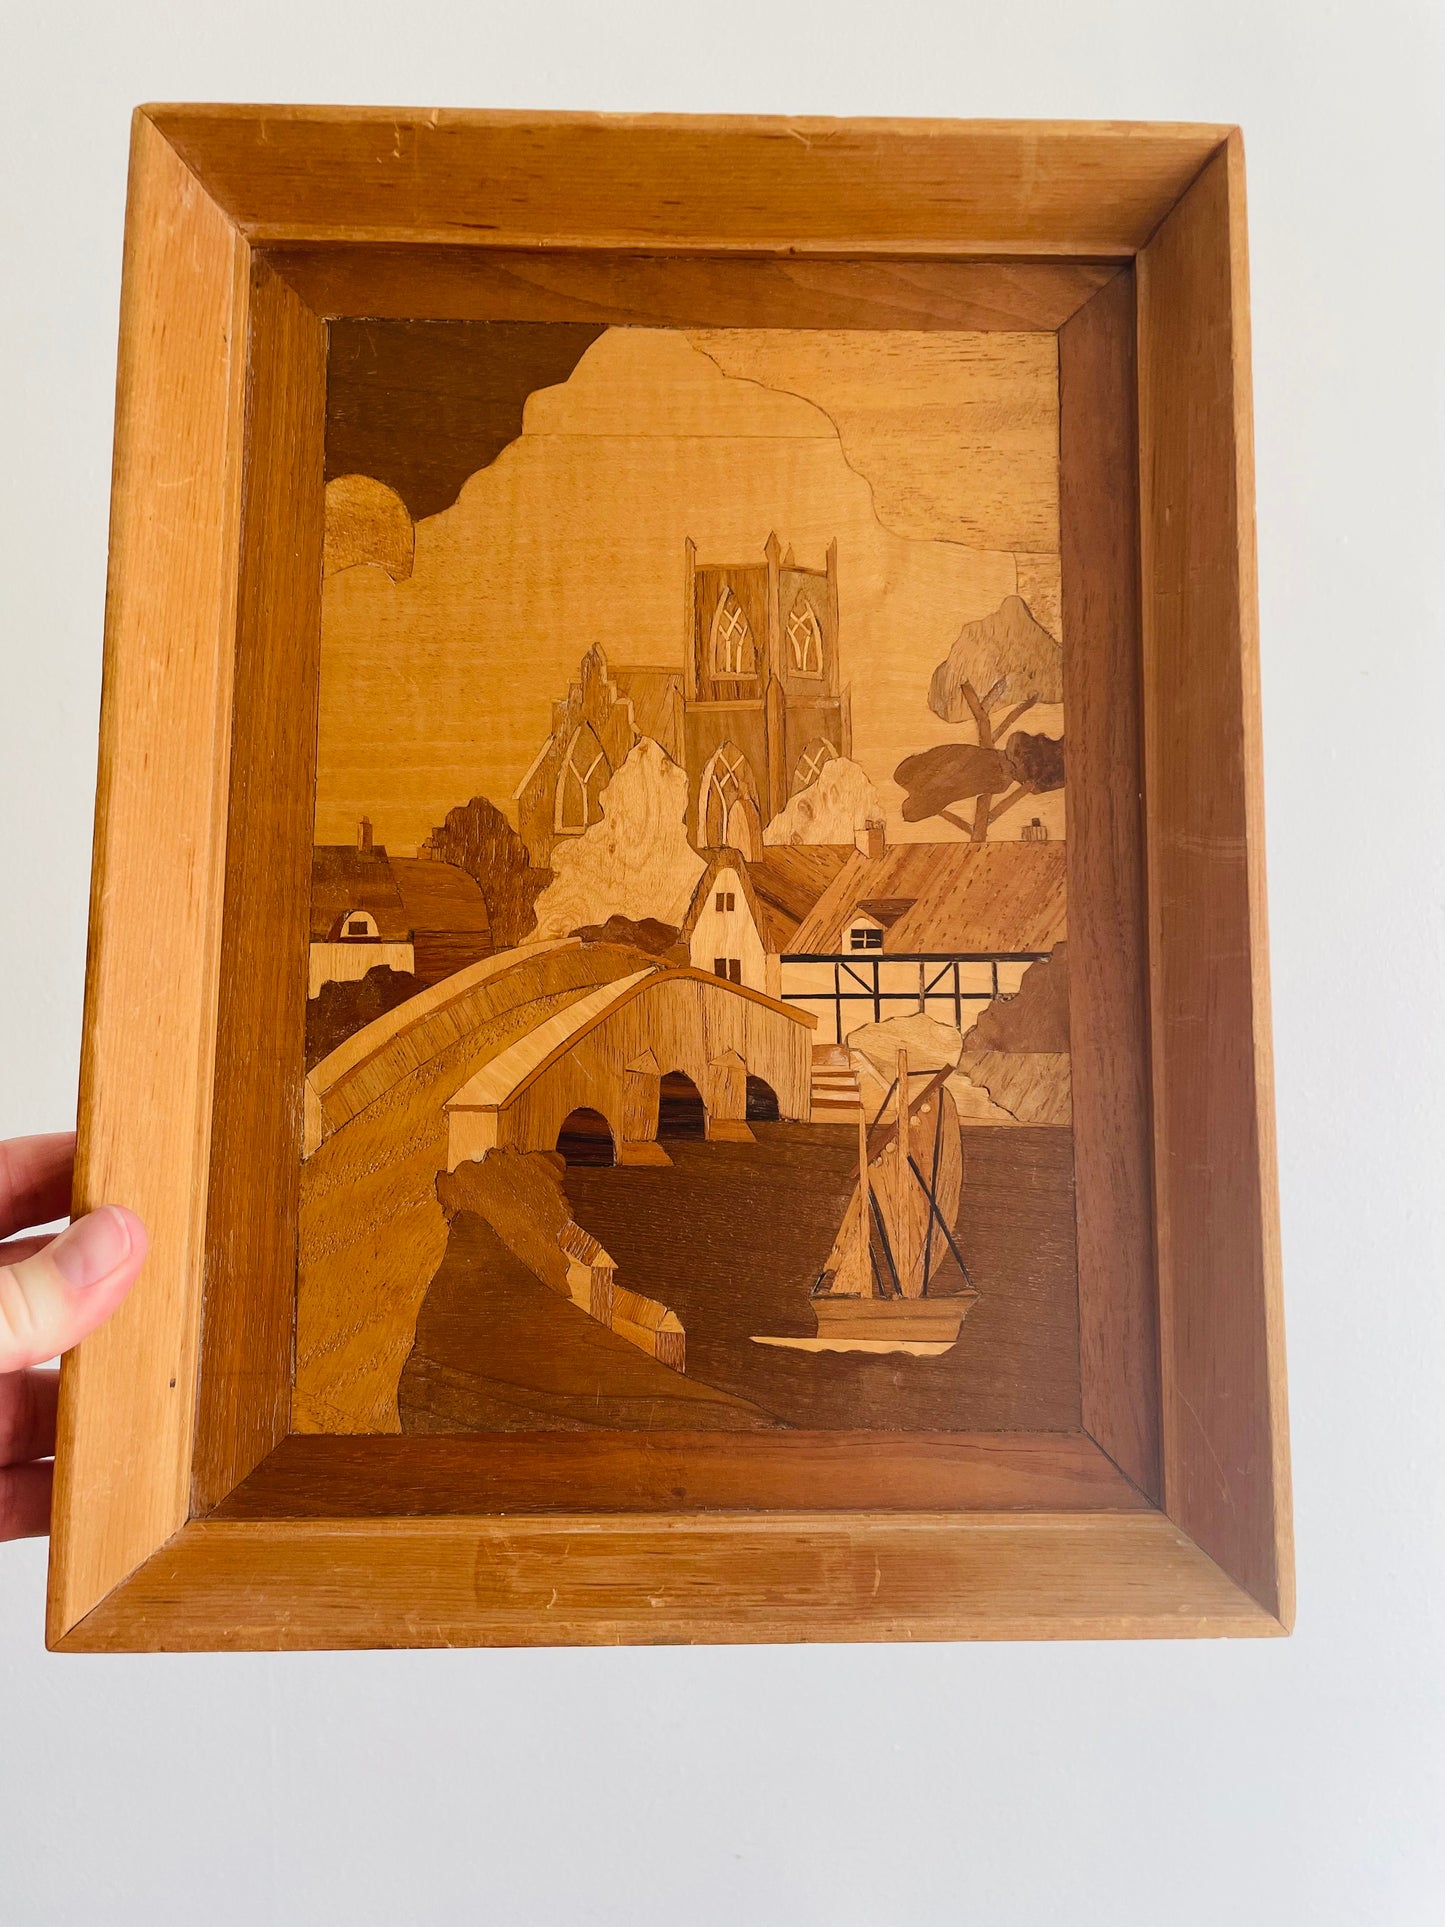 Handmade Framed Inlaid Wood Marquetry Picture - The Village Church by Harold Hurst